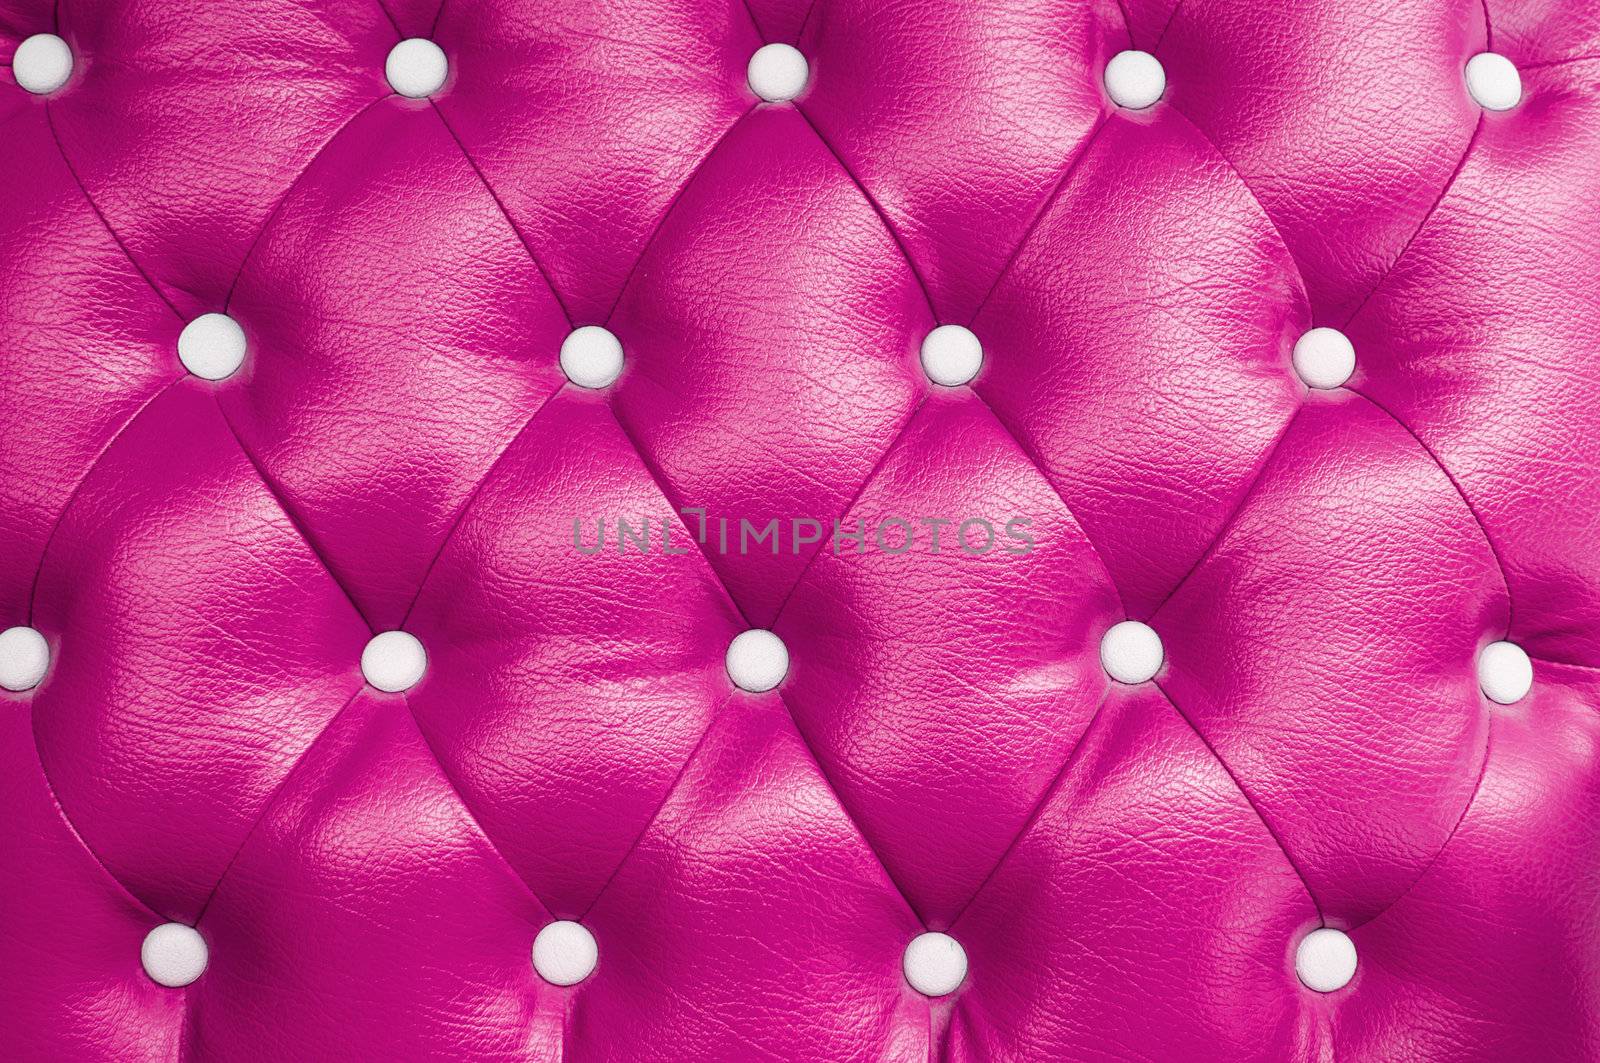 picture of pink genuine leather upholstery